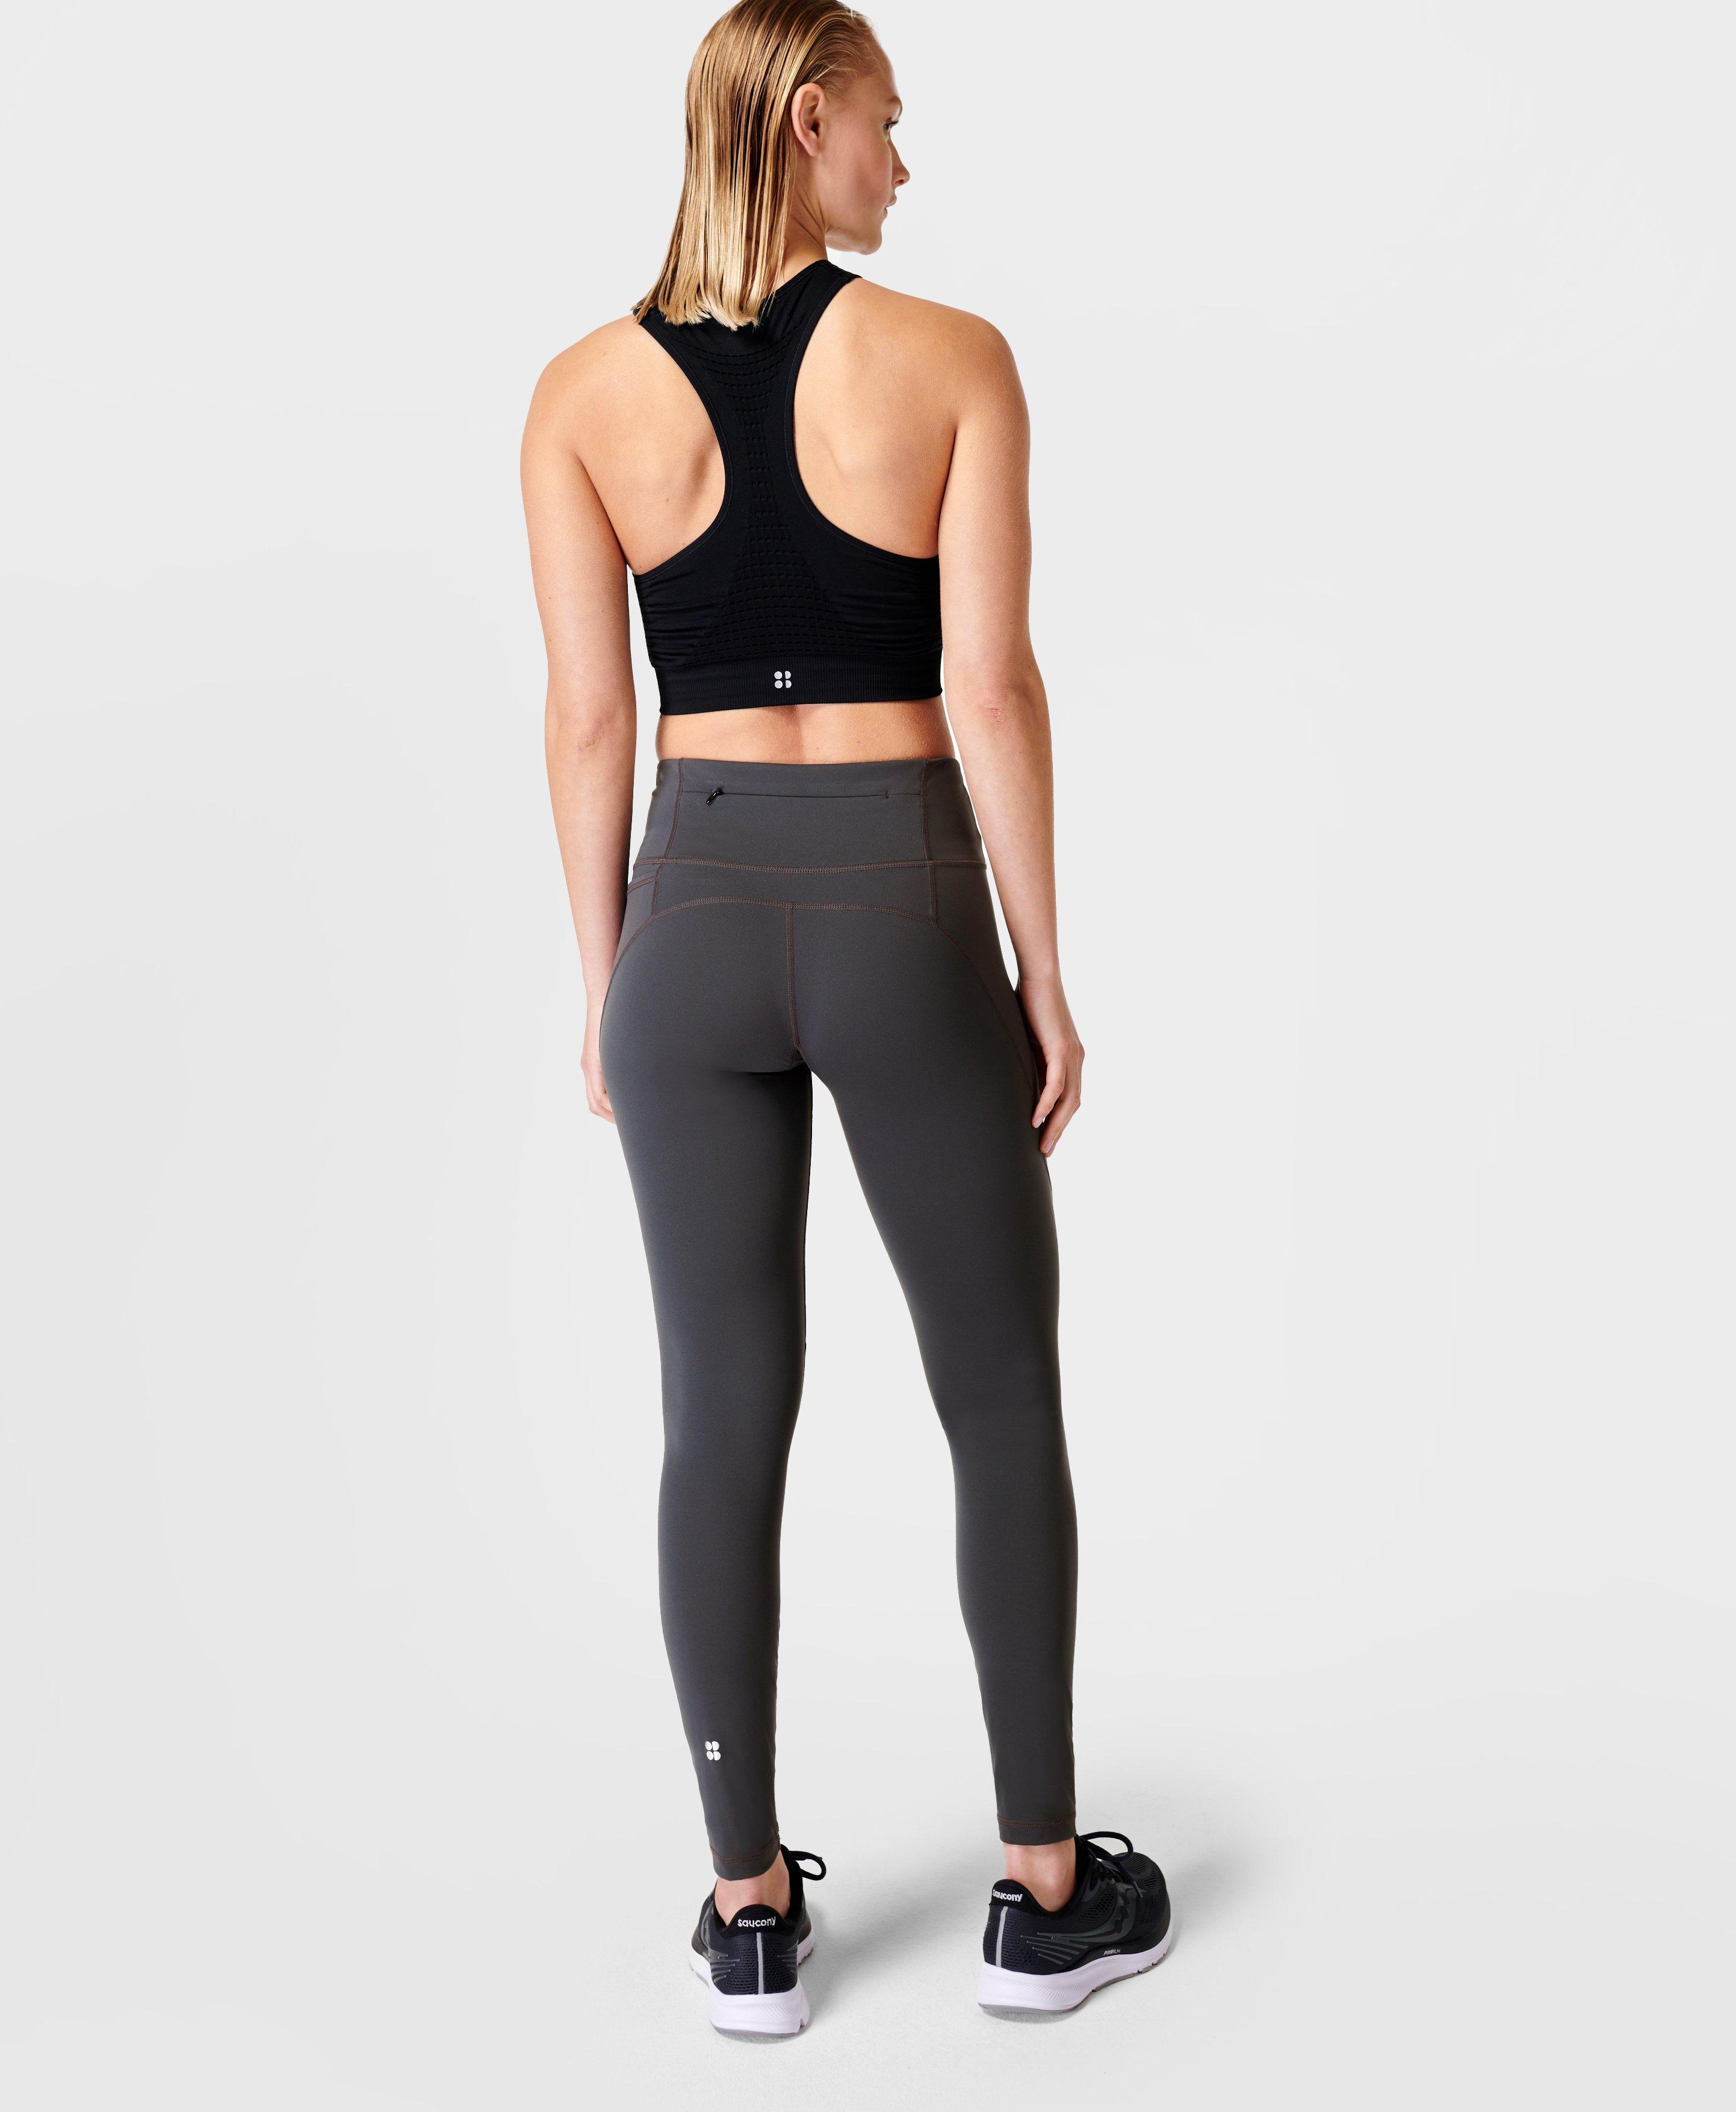 Womens Workout Yoga Solid Charcoal Grey Leggings